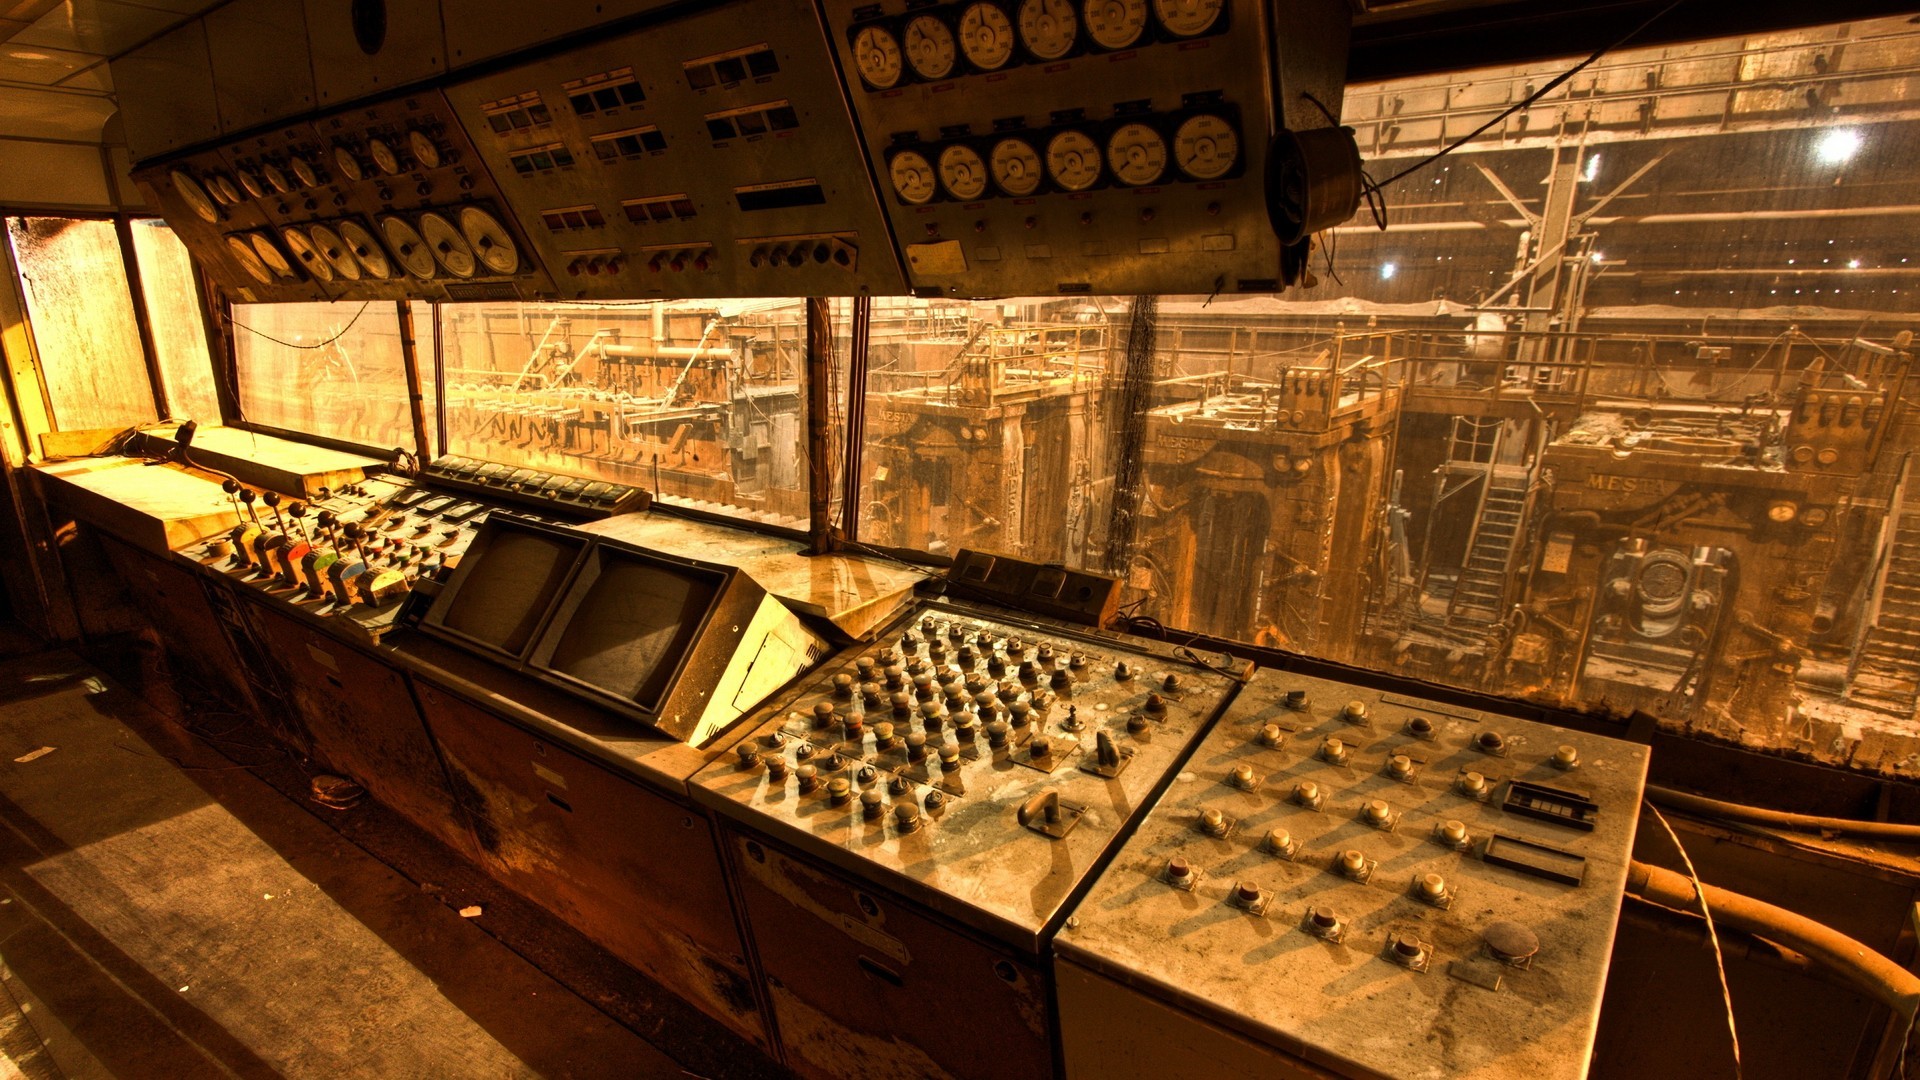 General 1920x1080 industrial factories buttons monitor abandoned technology